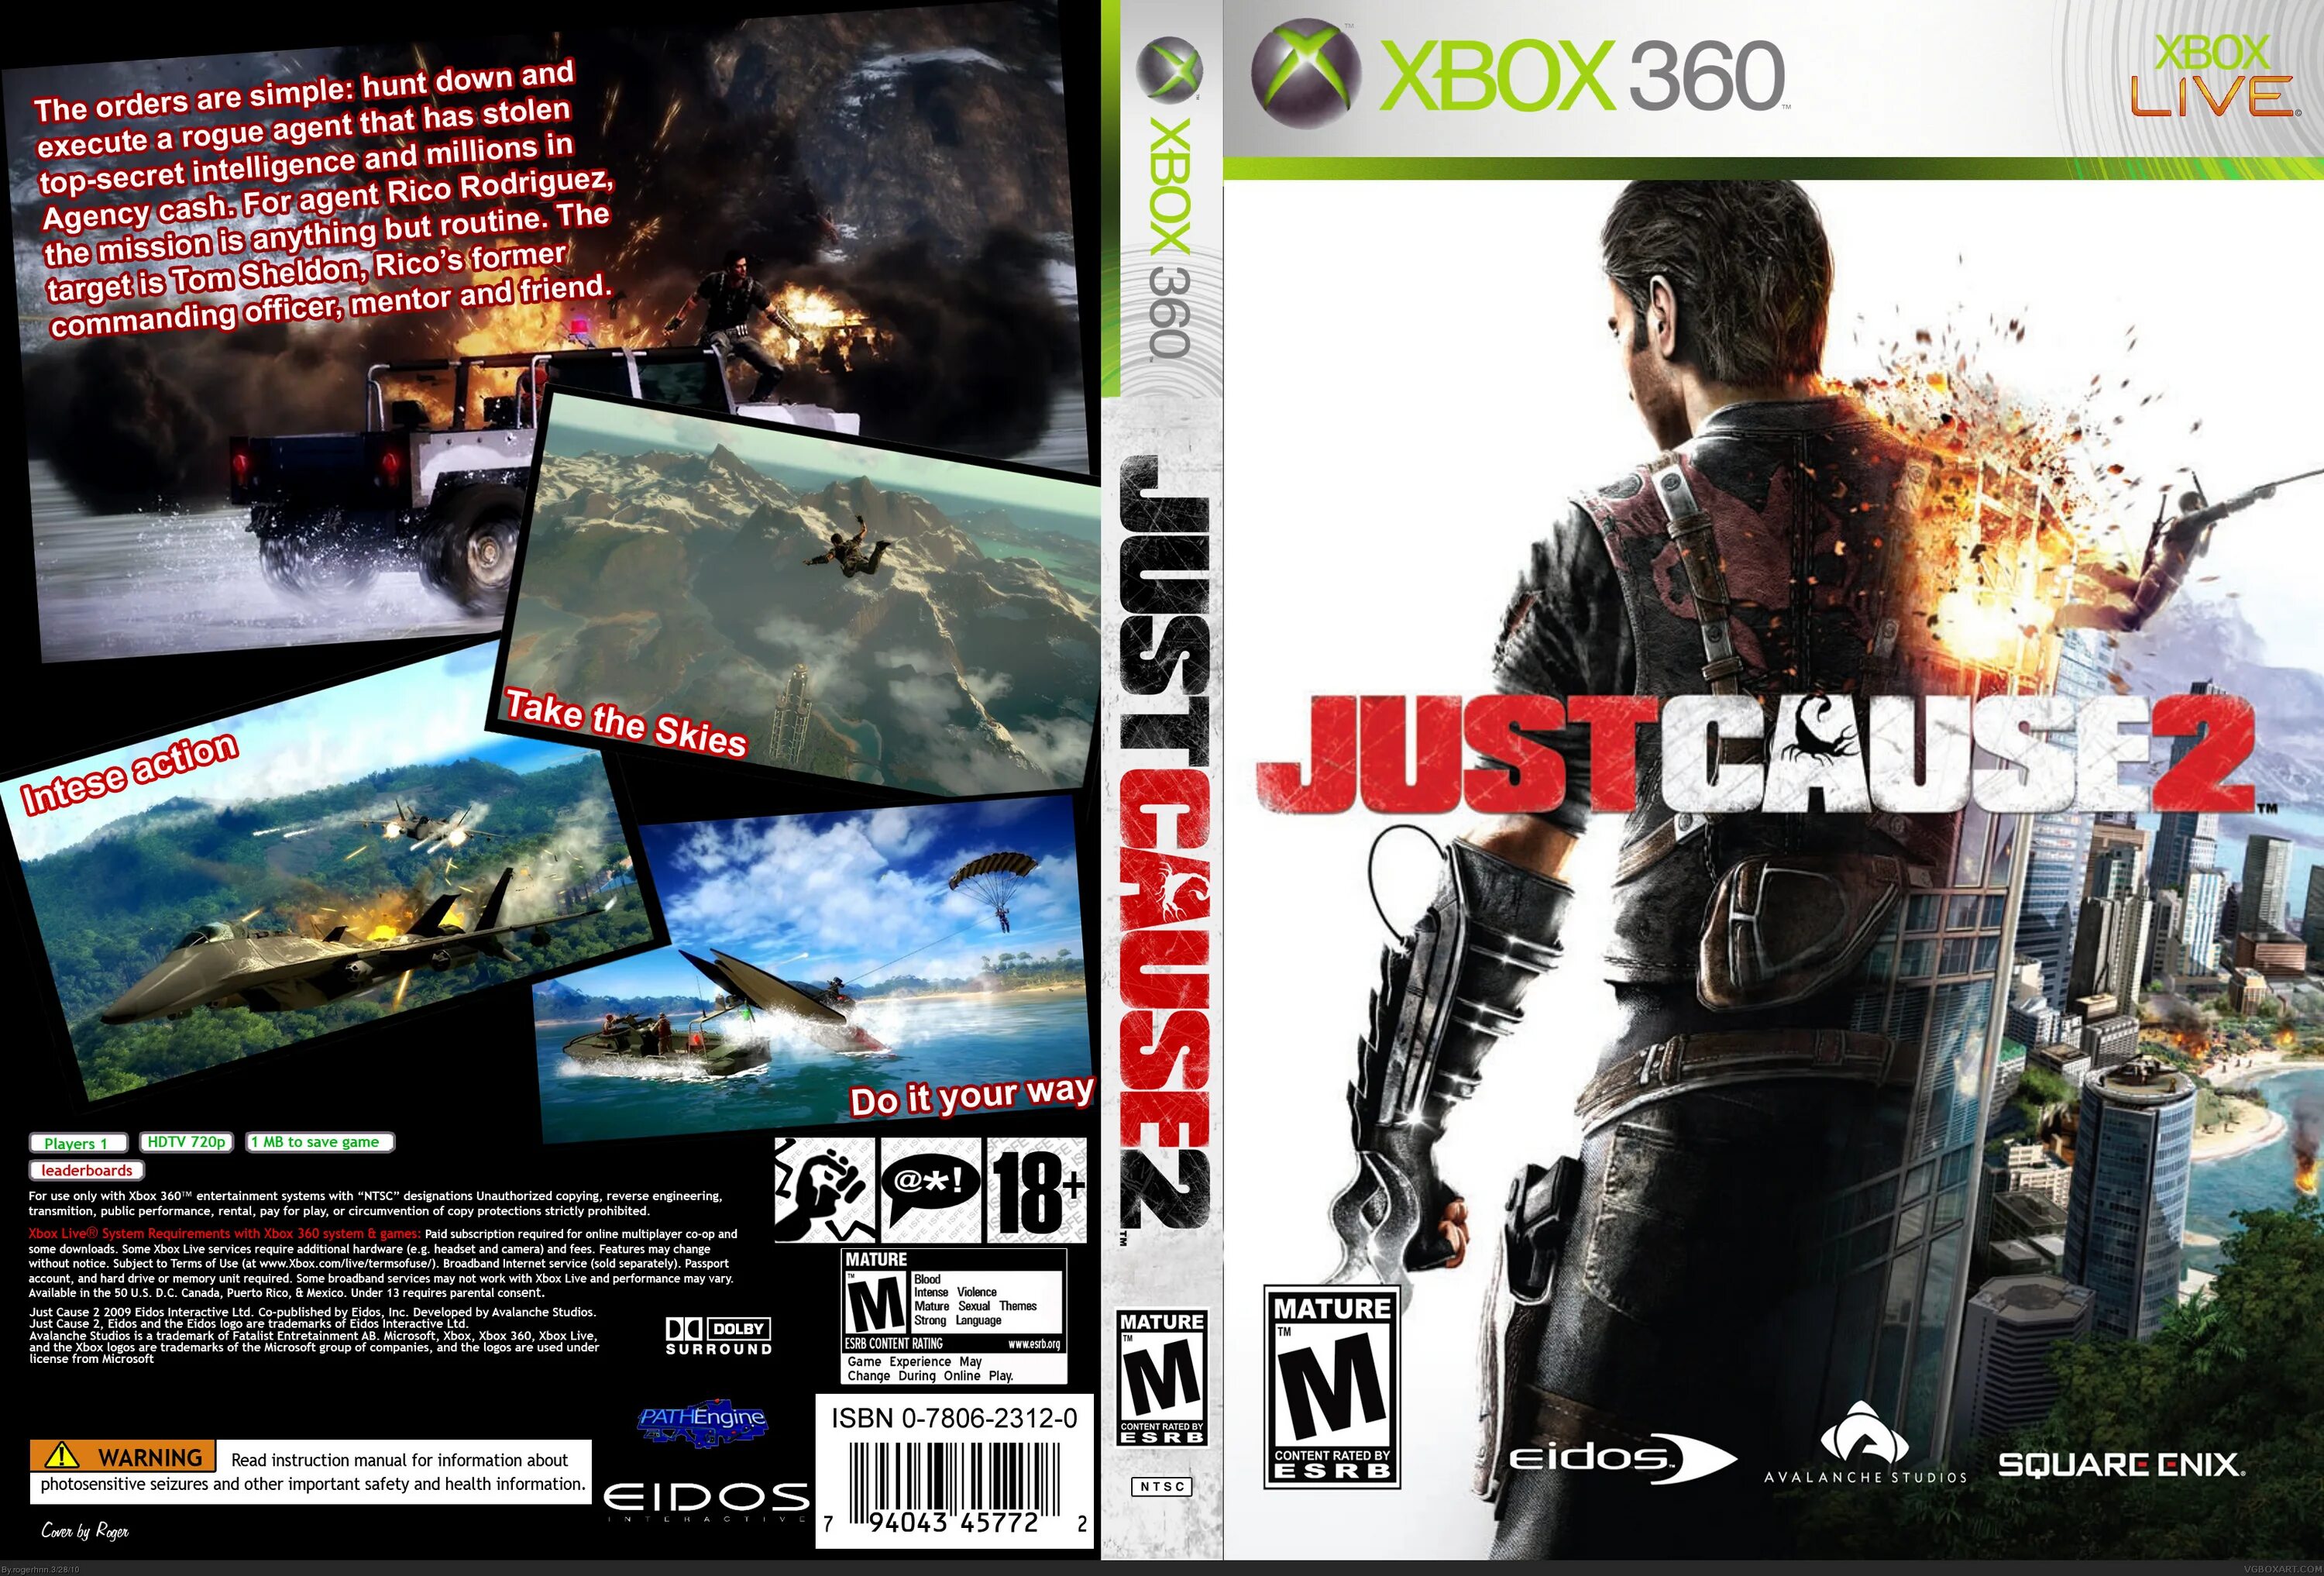 Just cause 2 Xbox 360 обложка. Just cause Xbox 360. Just cause 2 диск. Just cause 1 Xbox 360. Игры на икс бокс freeboot